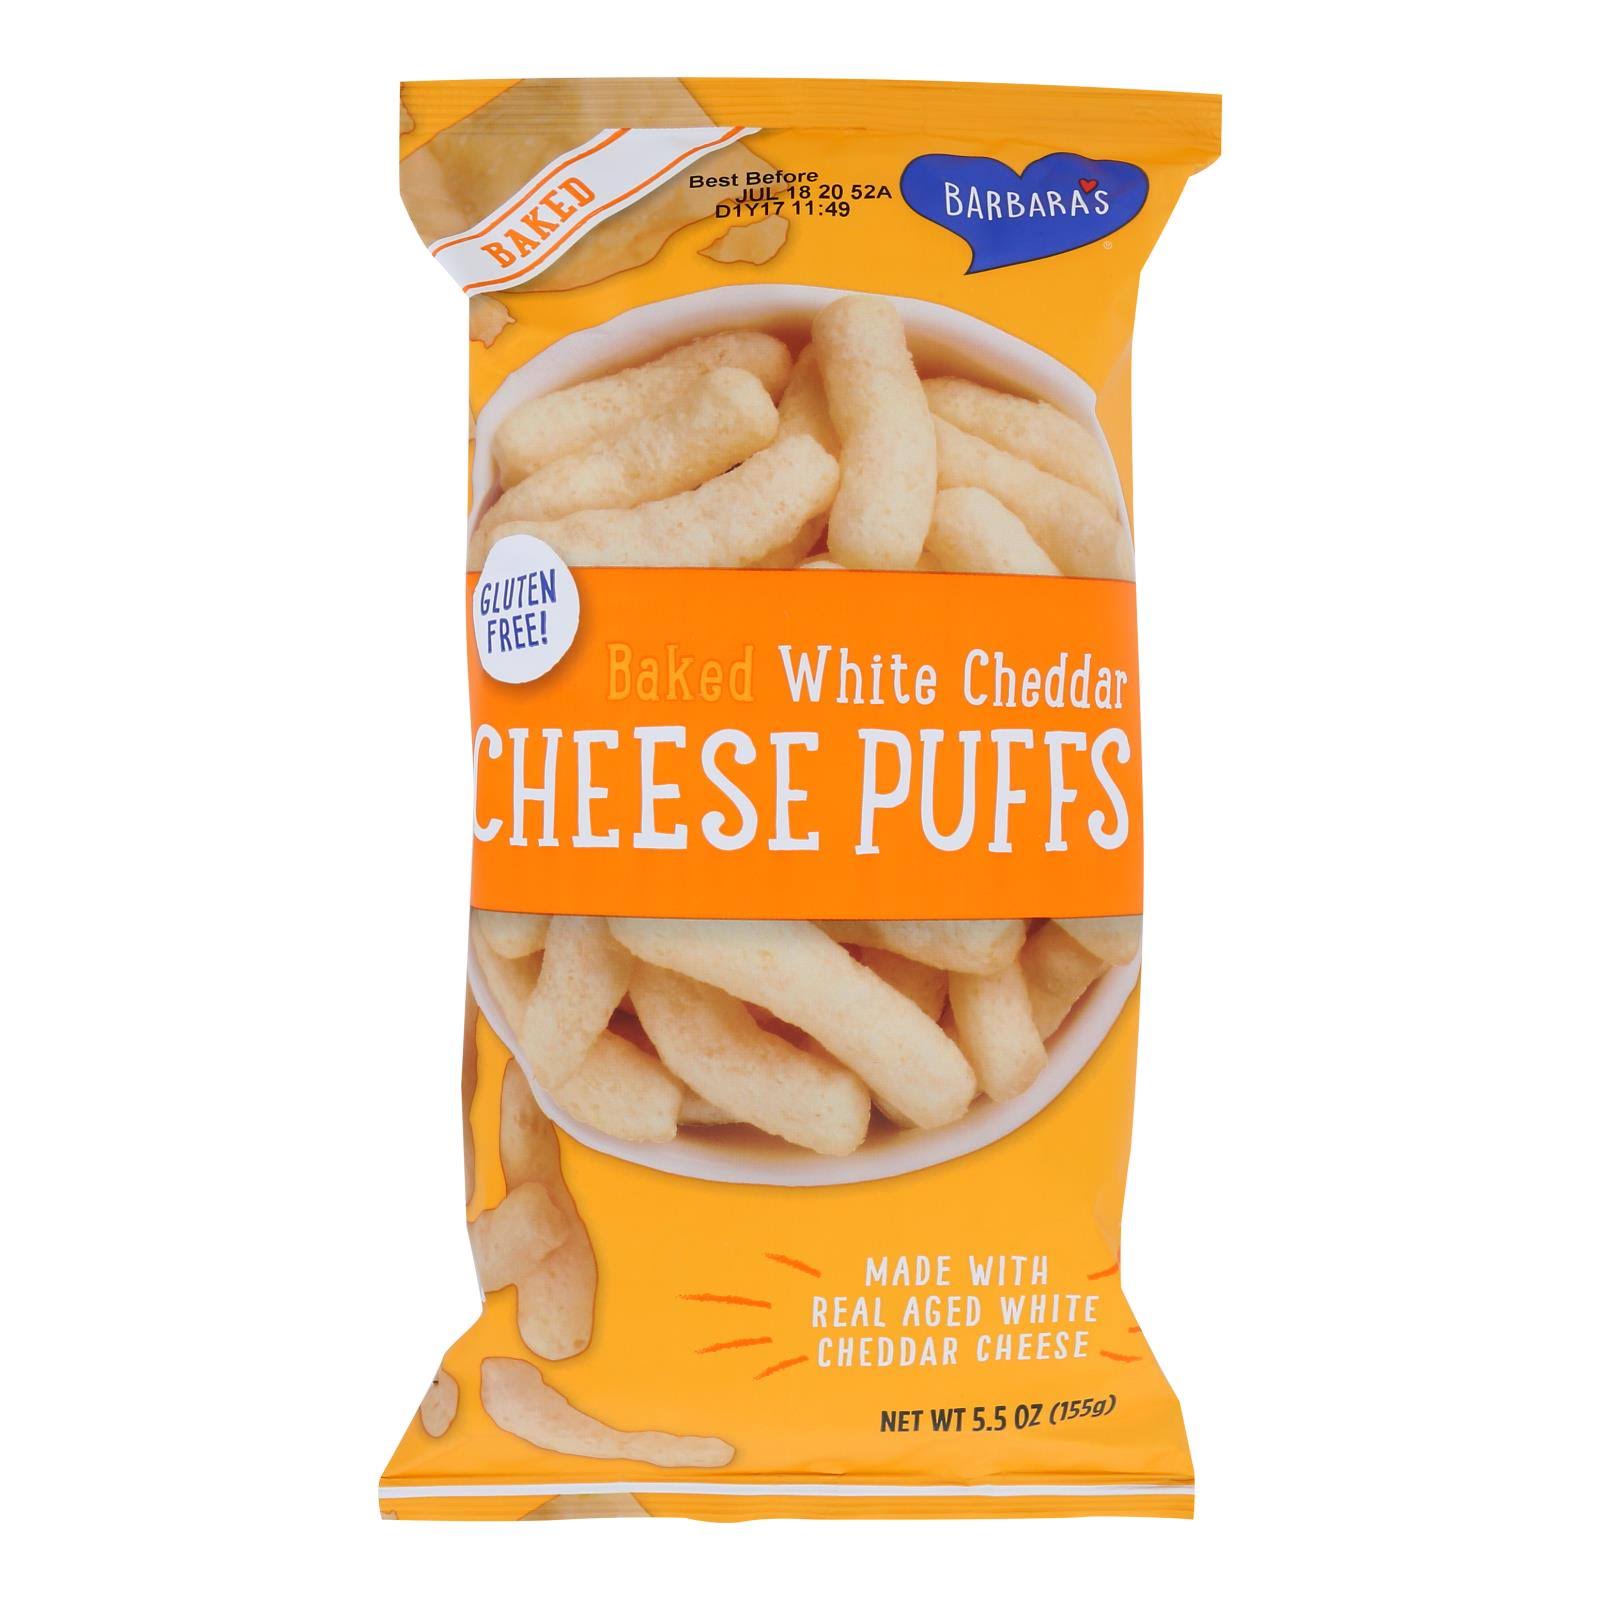 Barbara's Baked White Cheddar Cheese Puffs - 5.5oz